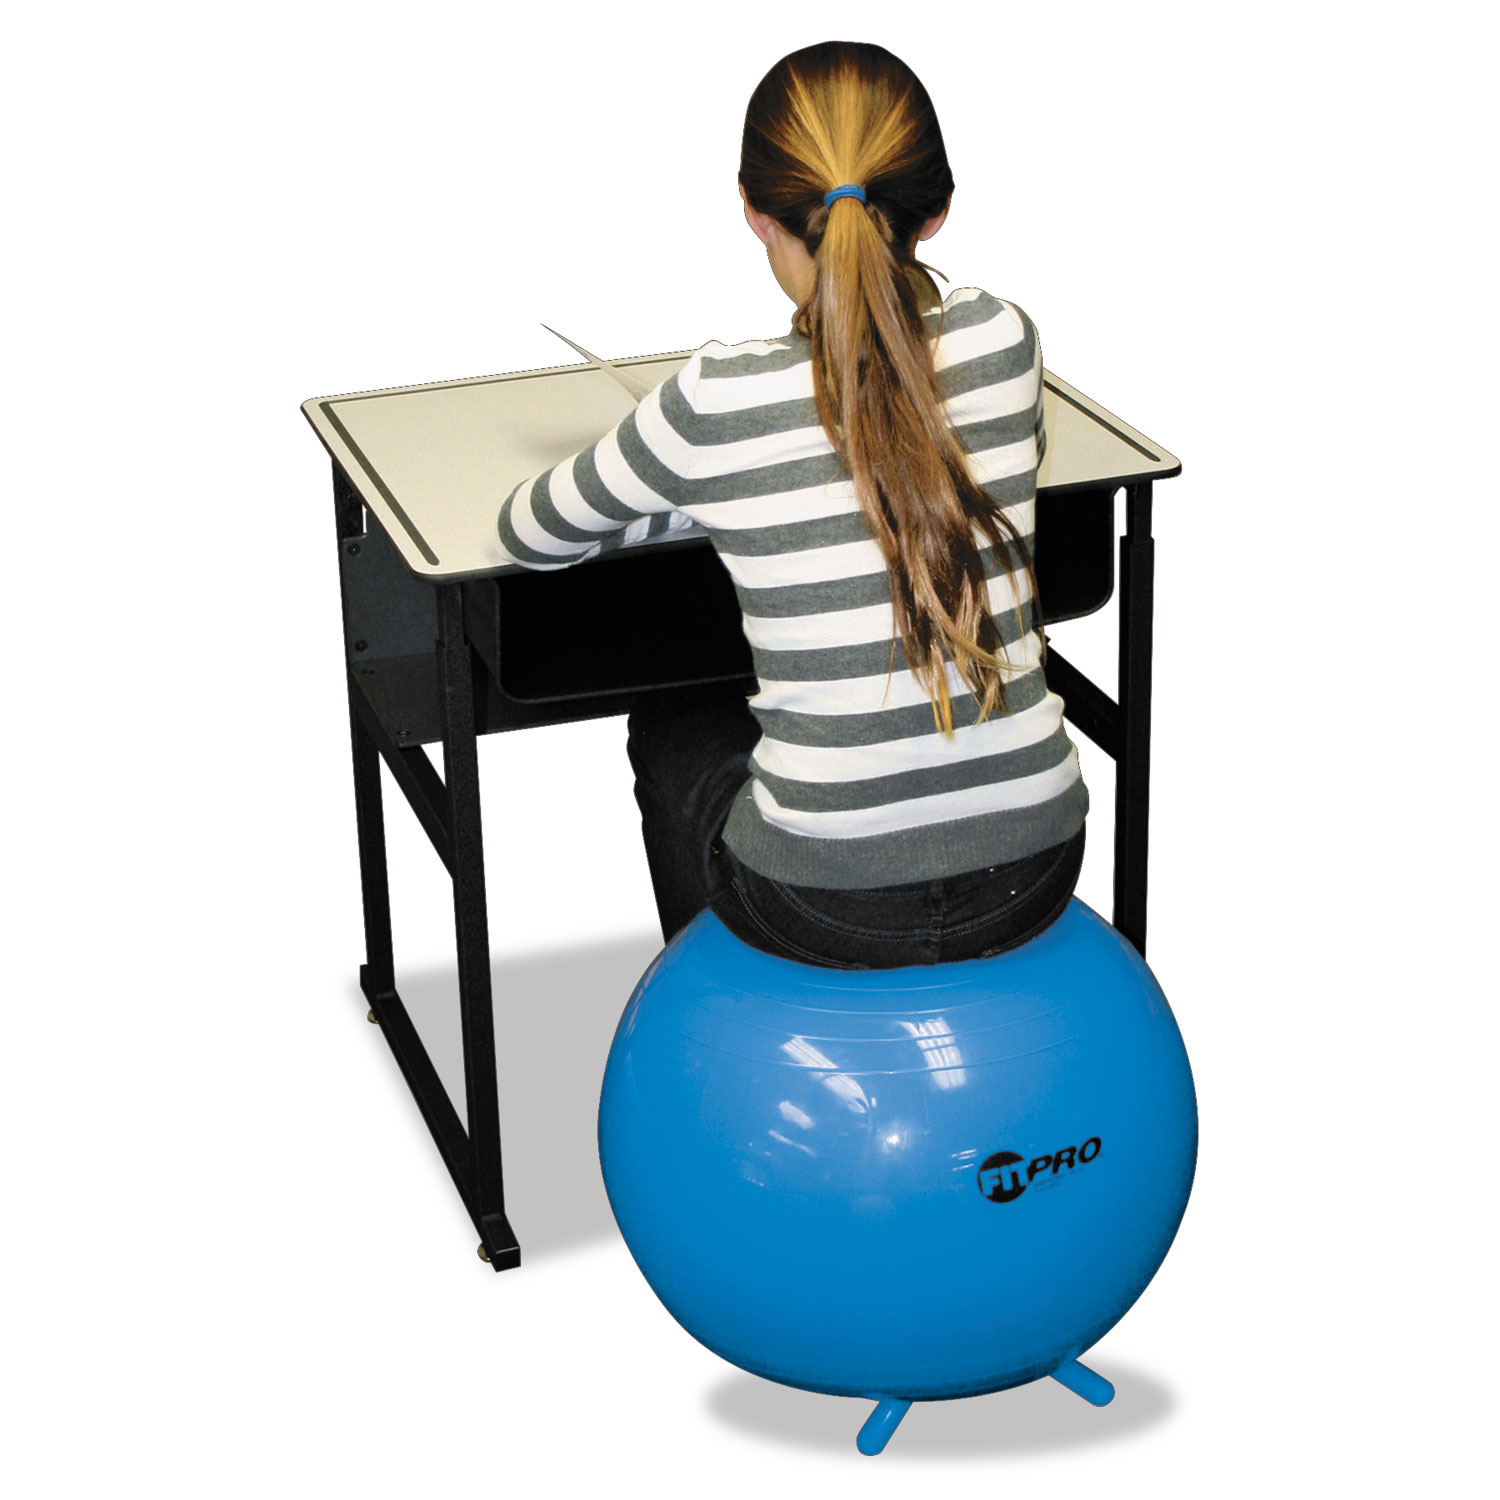 FitPro Ball with Stability Legs, 55cm Diameter, Blue